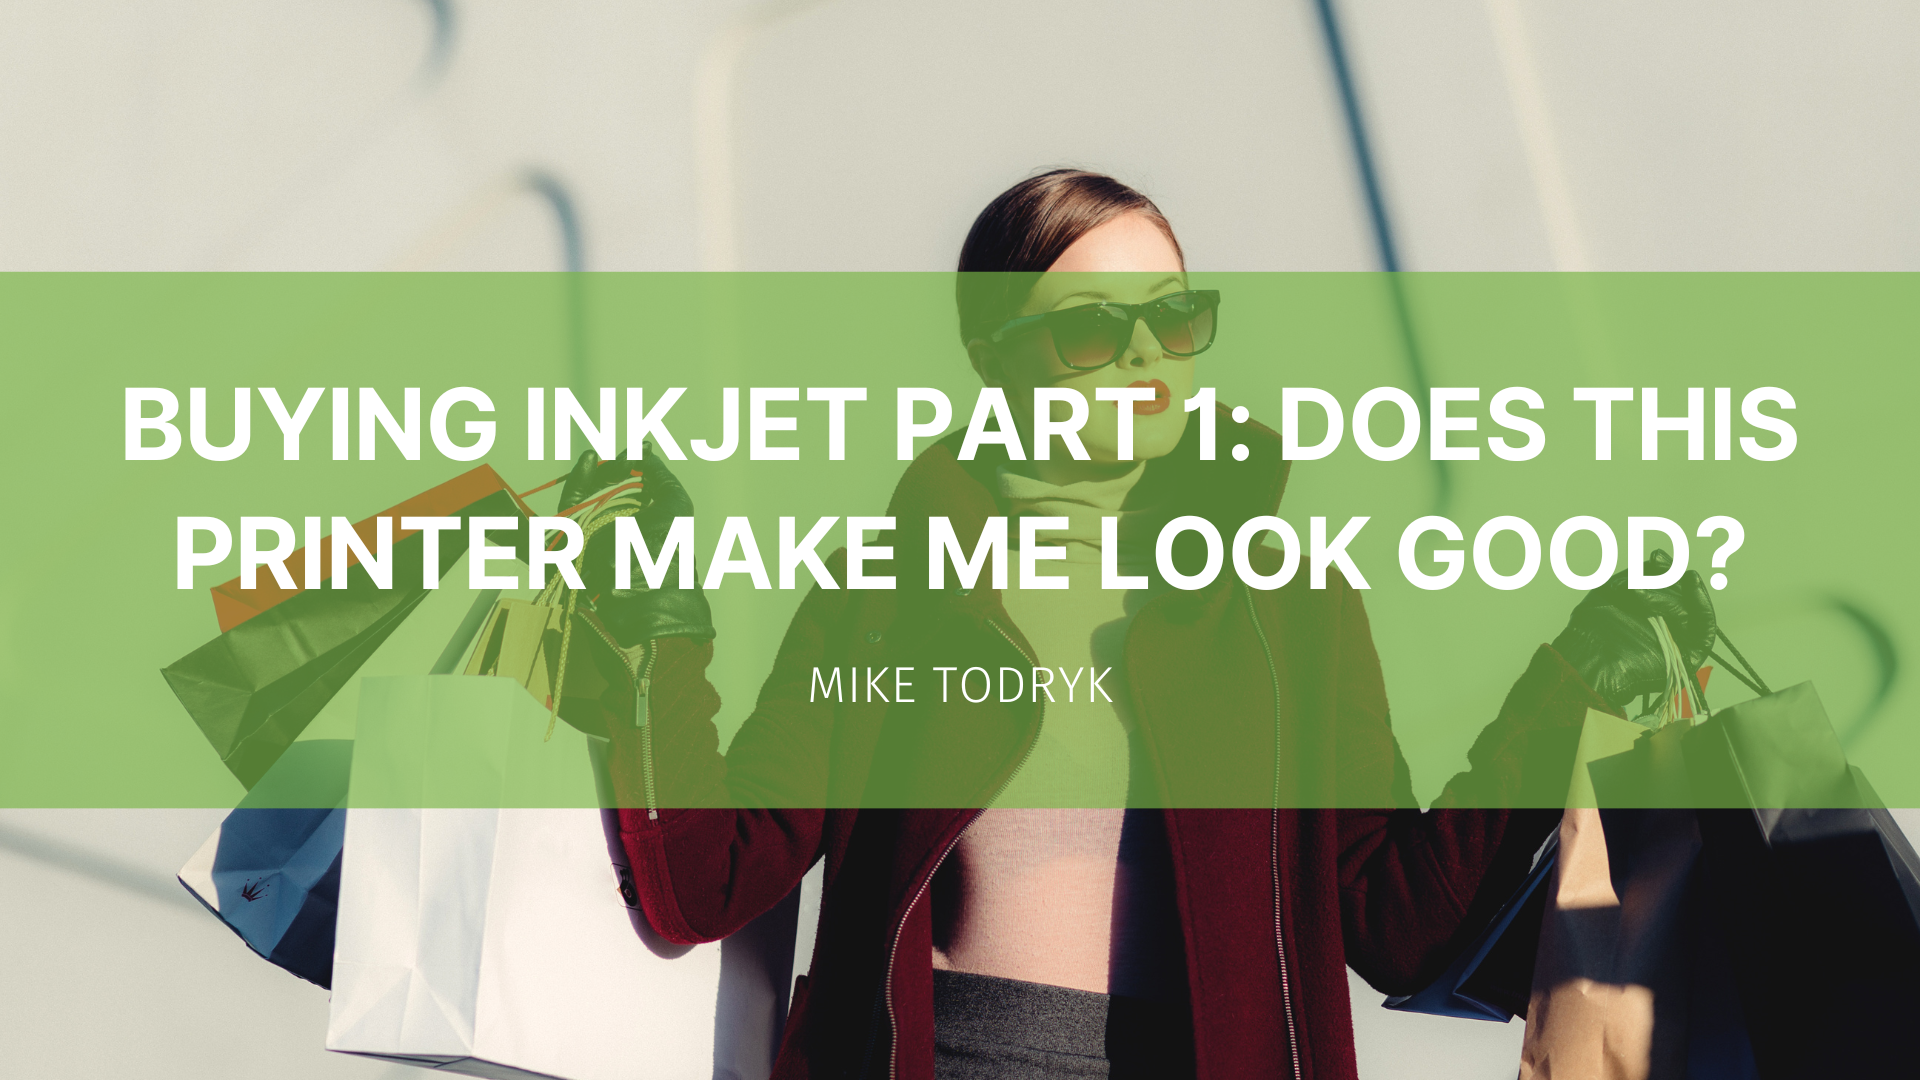 Featured image for “Buying Inkjet Part 1: Does This Printer Make Me Look Good?”